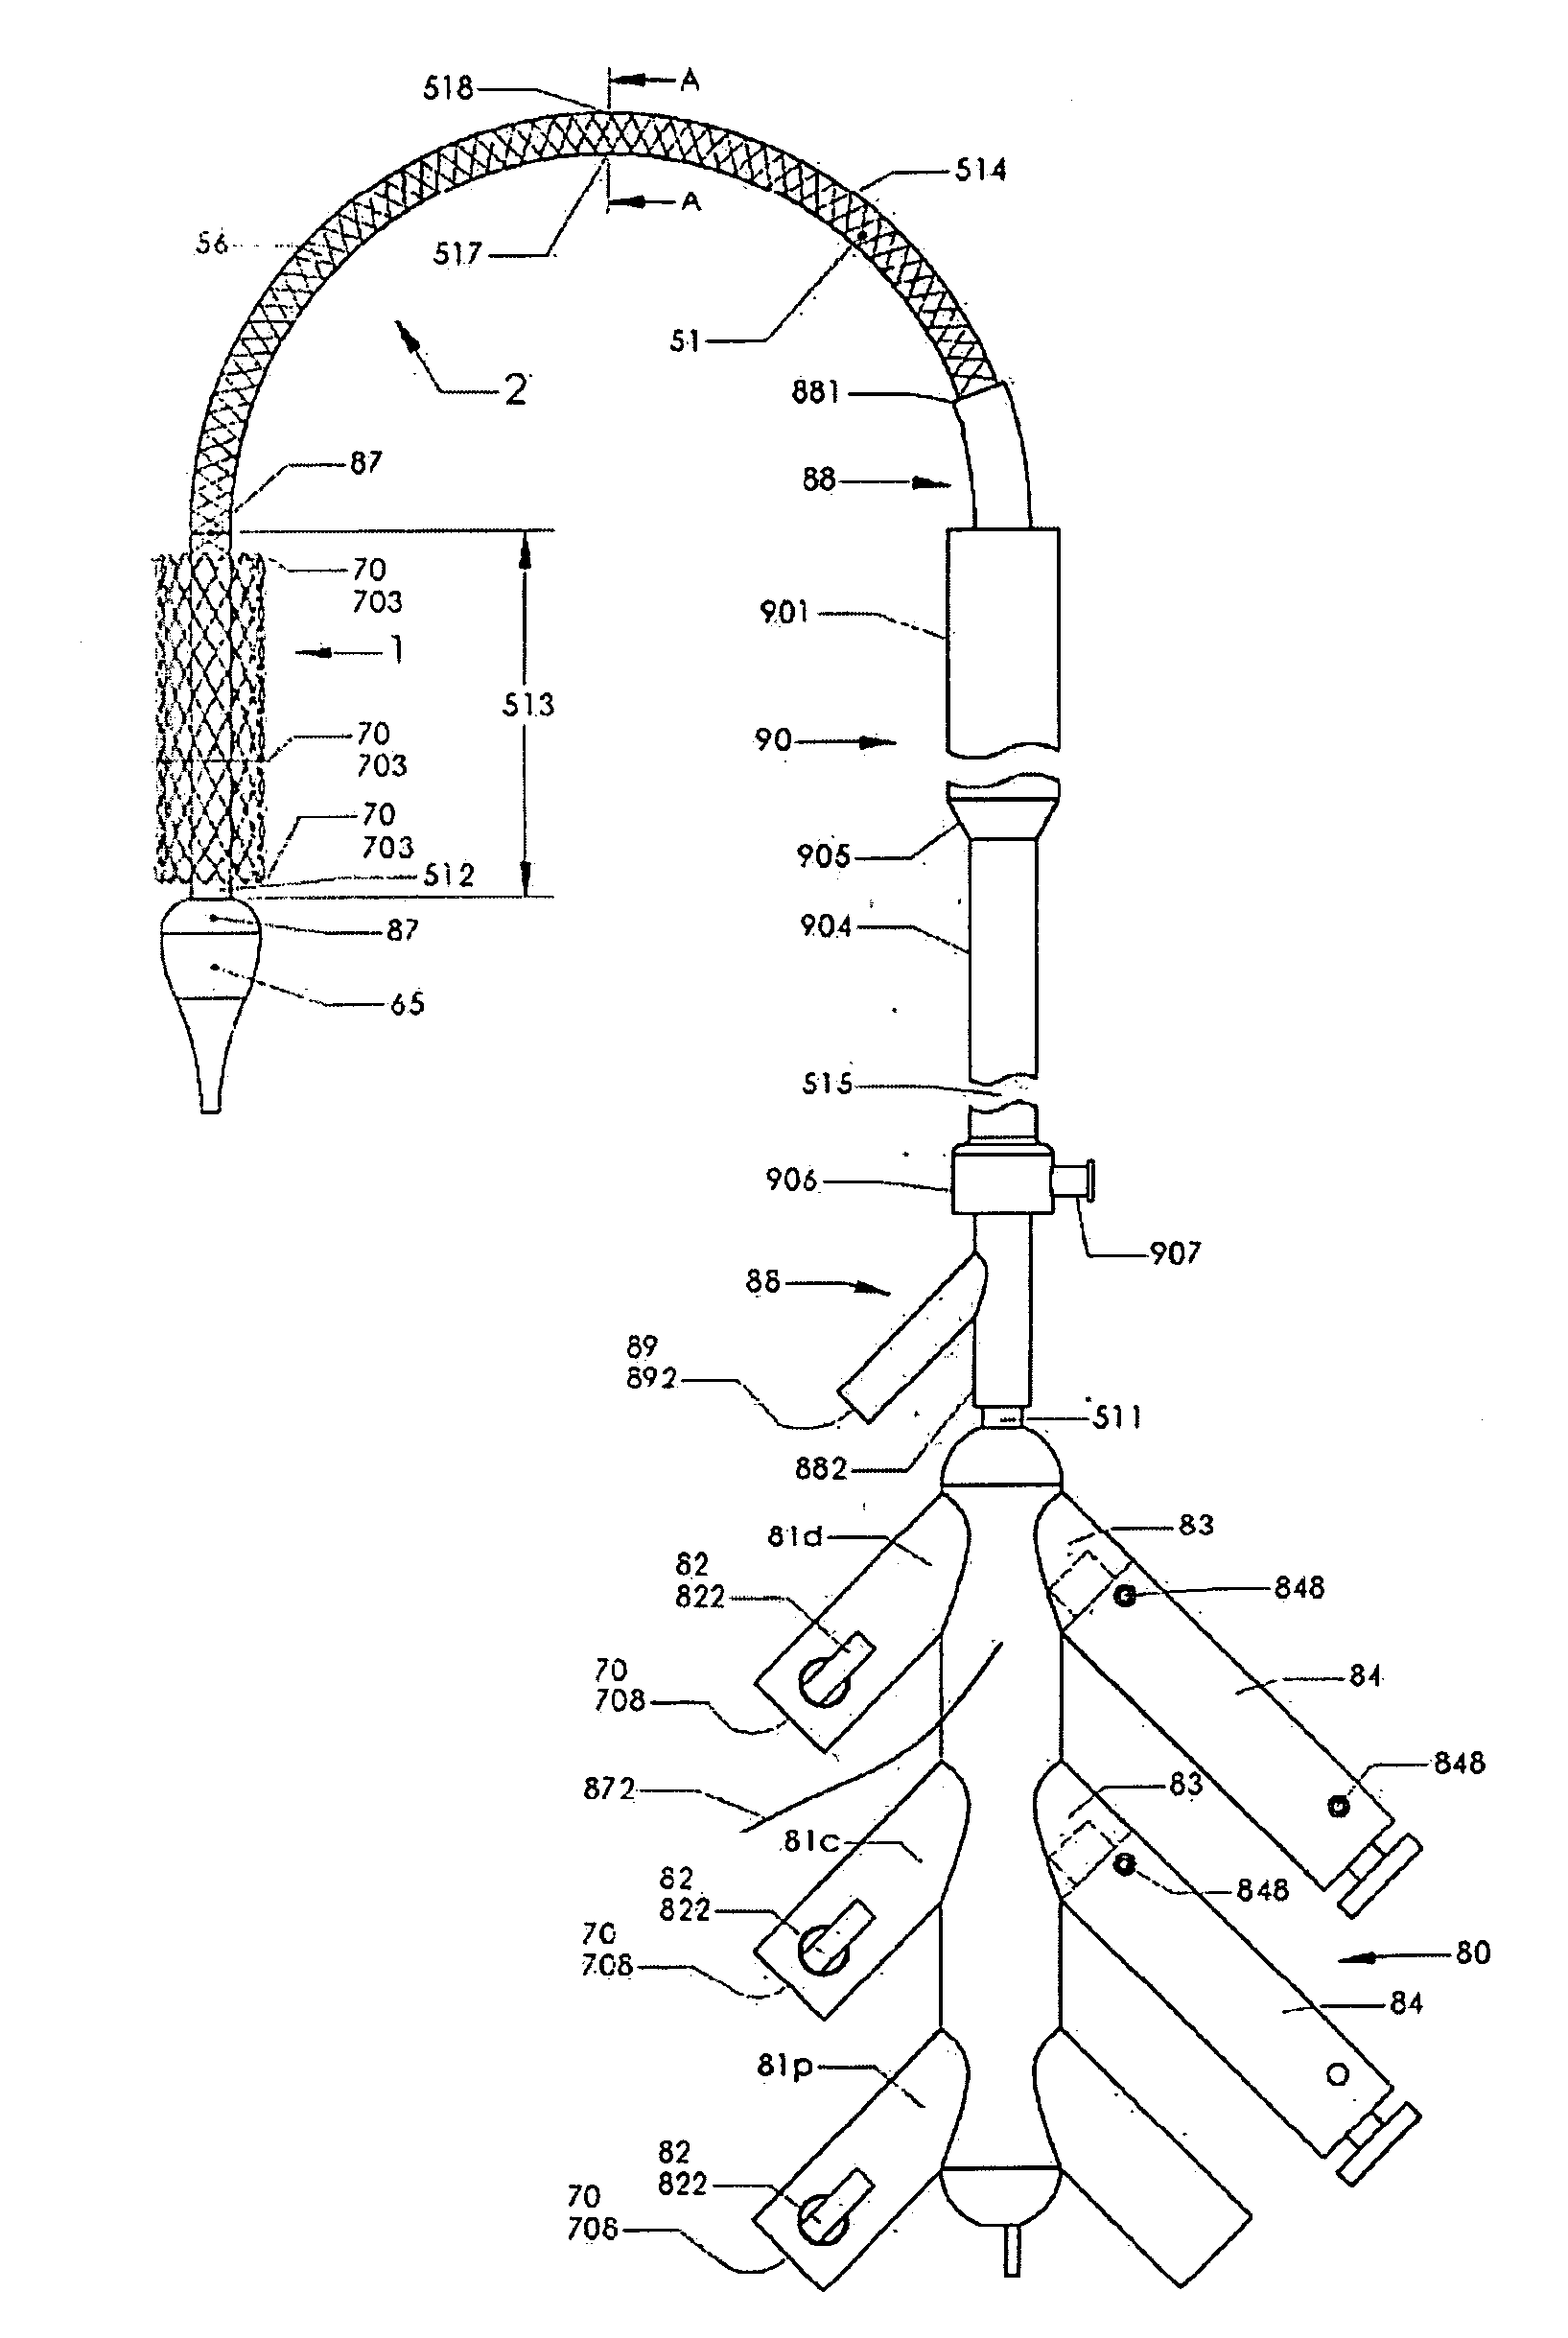 Delivery Device for Delivering a Self-Expanding Stent